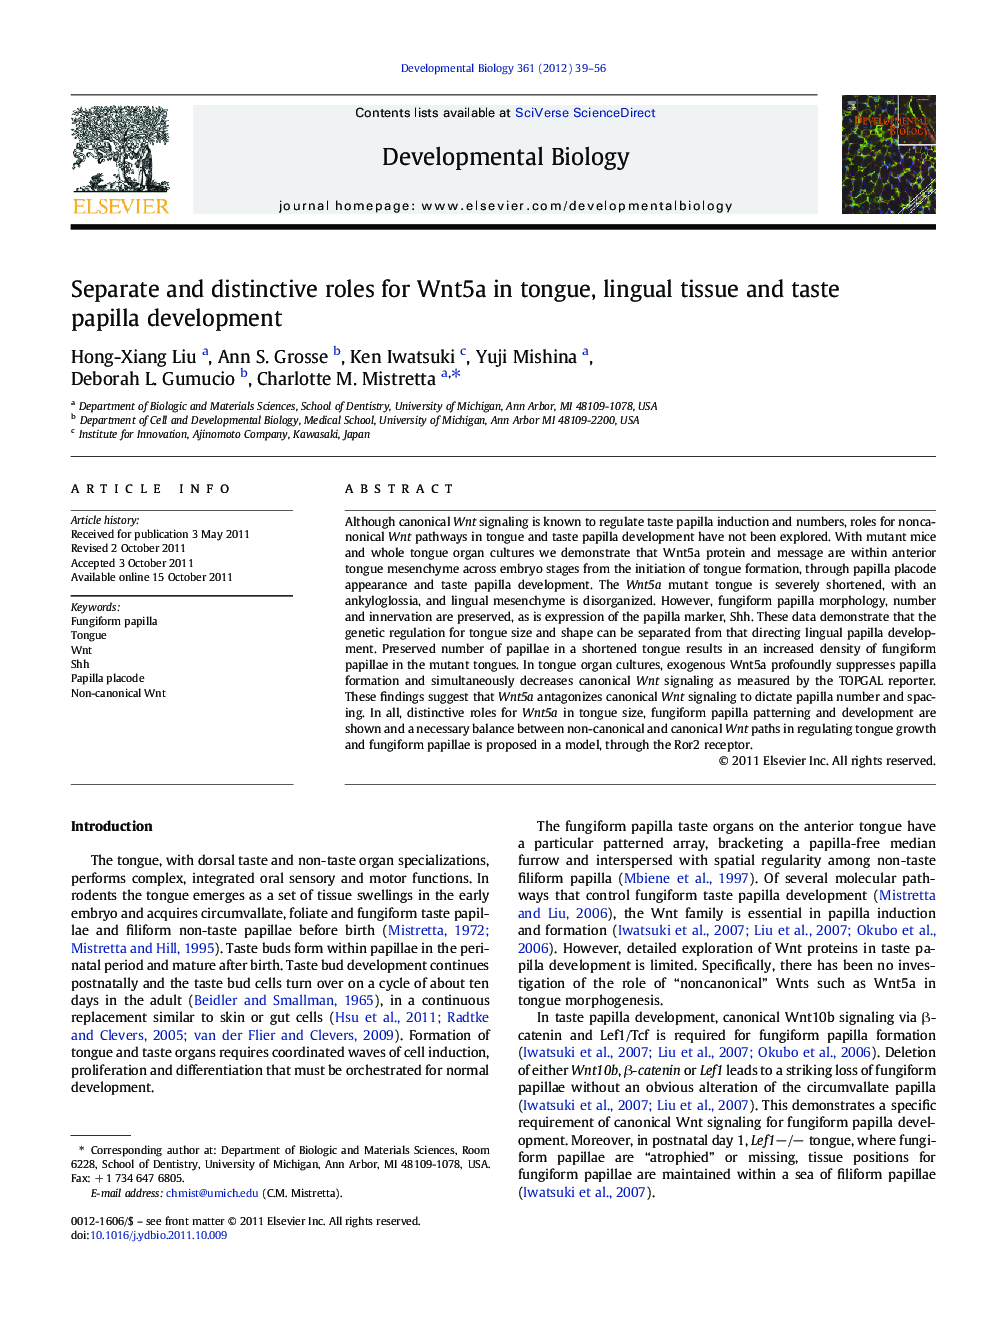 Separate and distinctive roles for Wnt5a in tongue, lingual tissue and taste papilla development